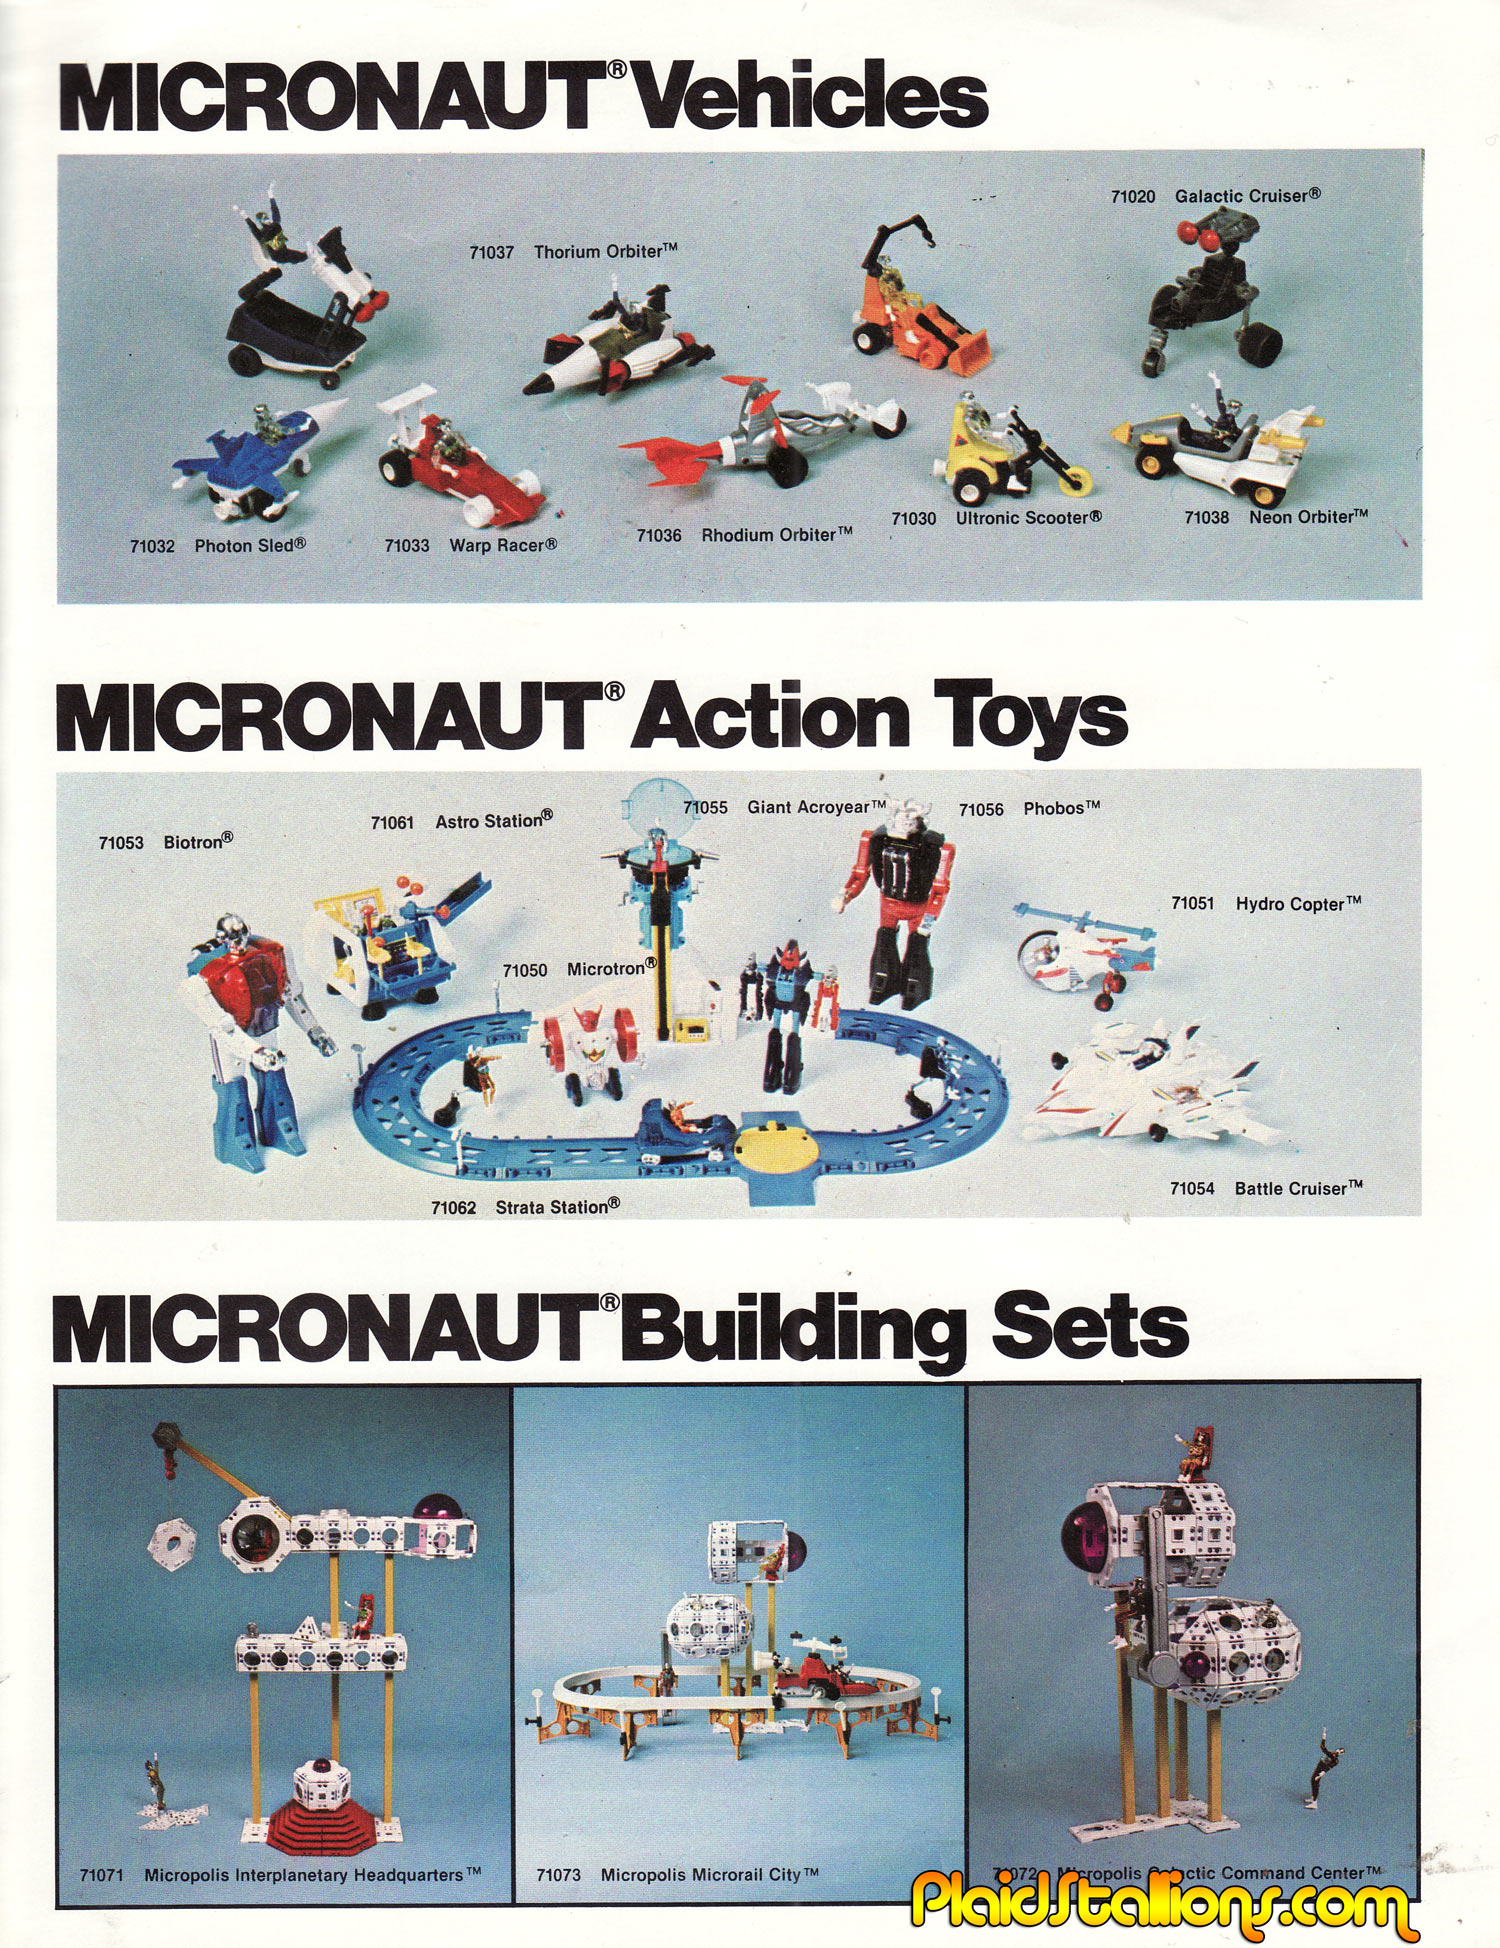 Mego Micronauts sales piece from 1978